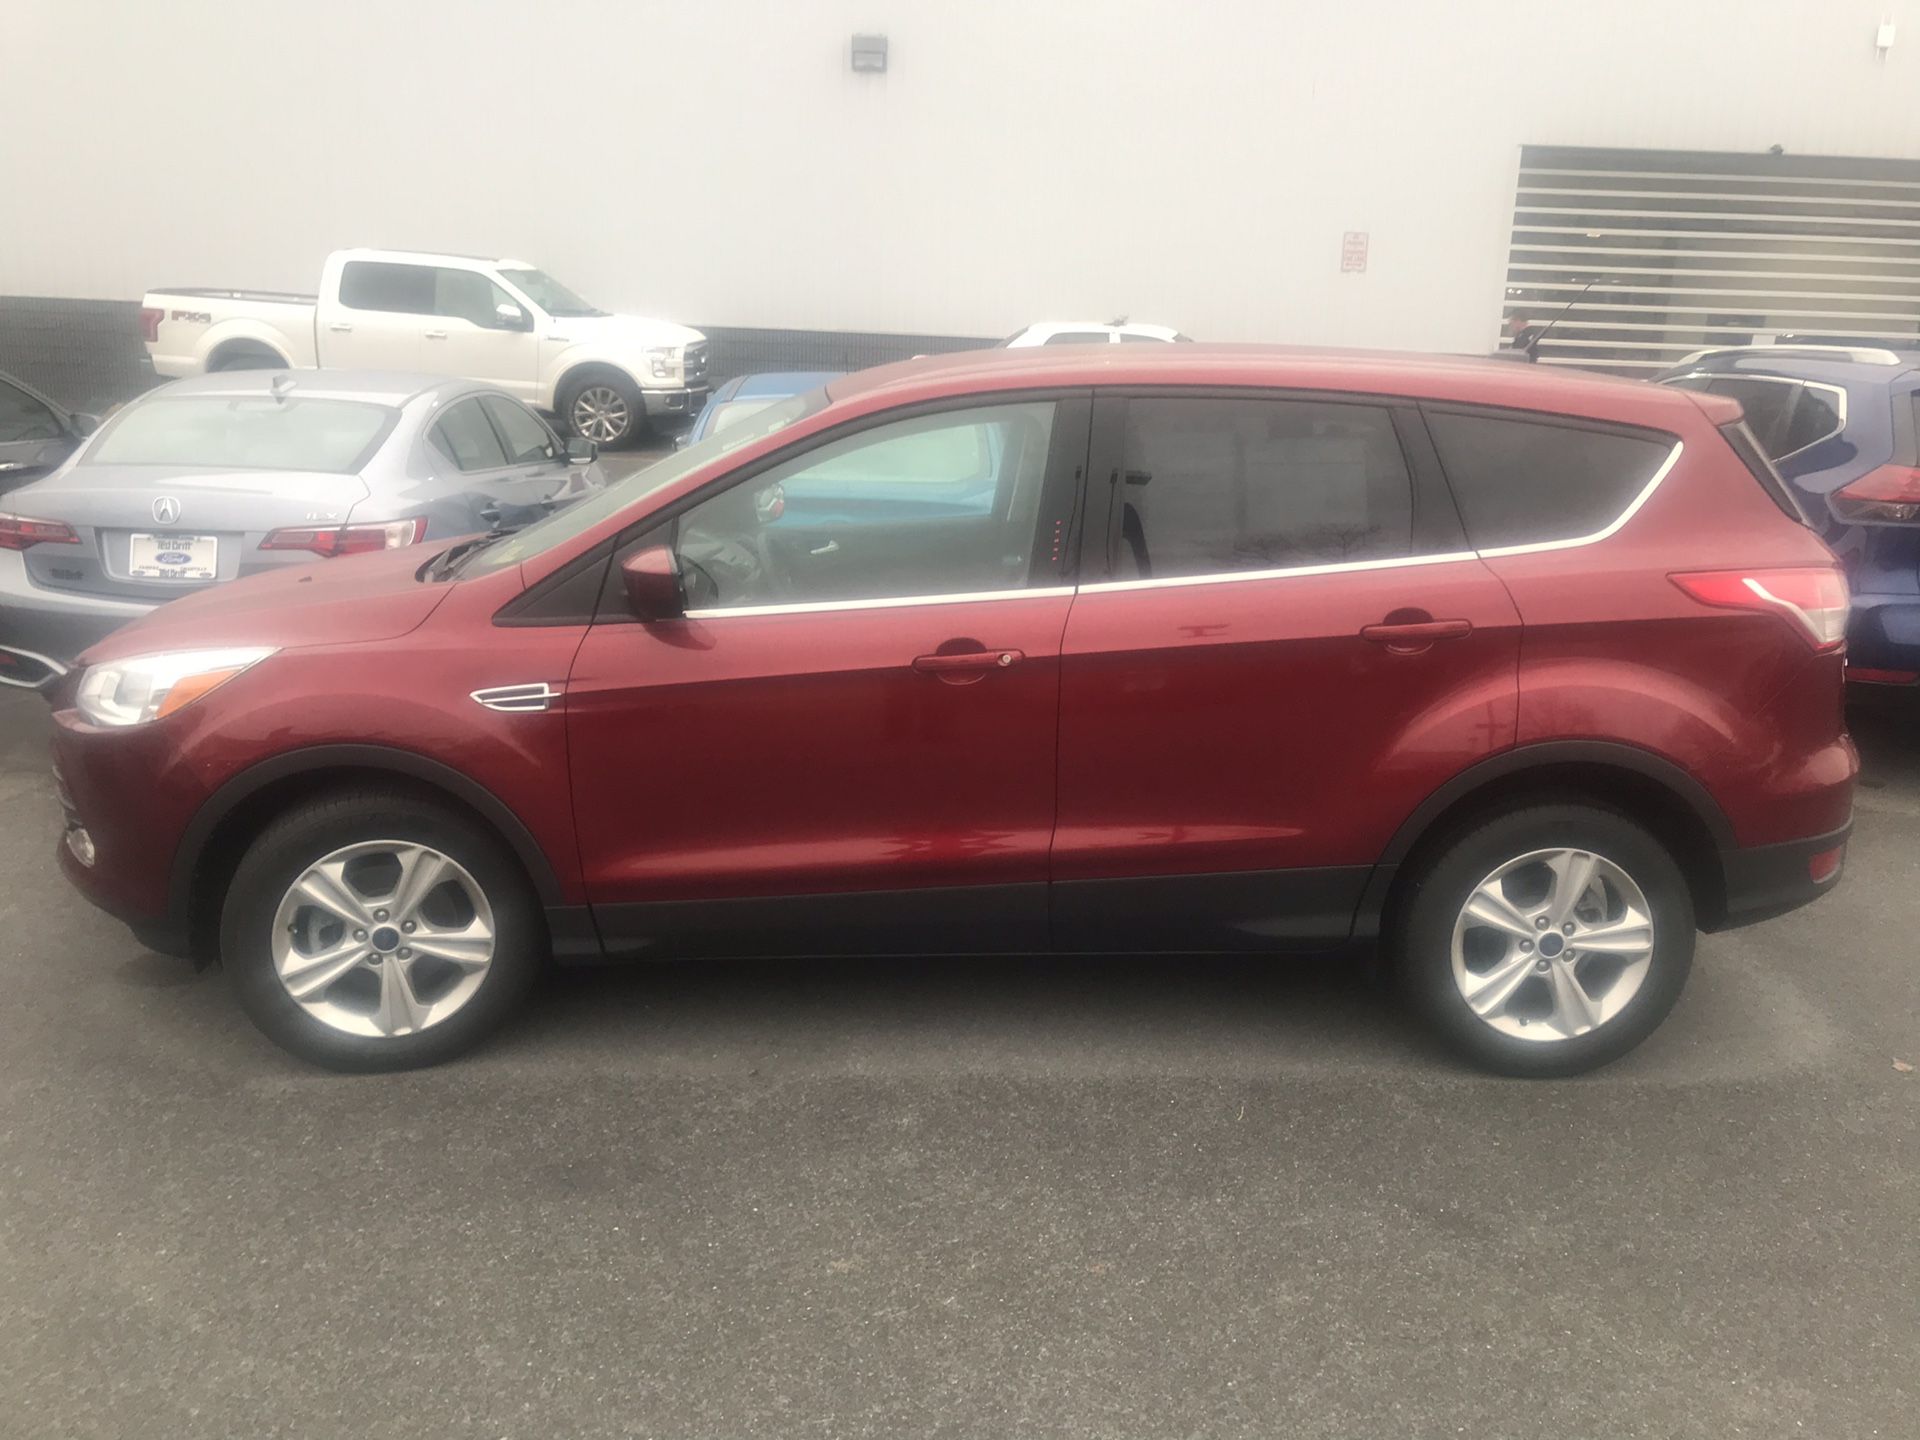 2016 Ford Escape SE FWD in Ruby Red with only 32,183 miles for $13,998.